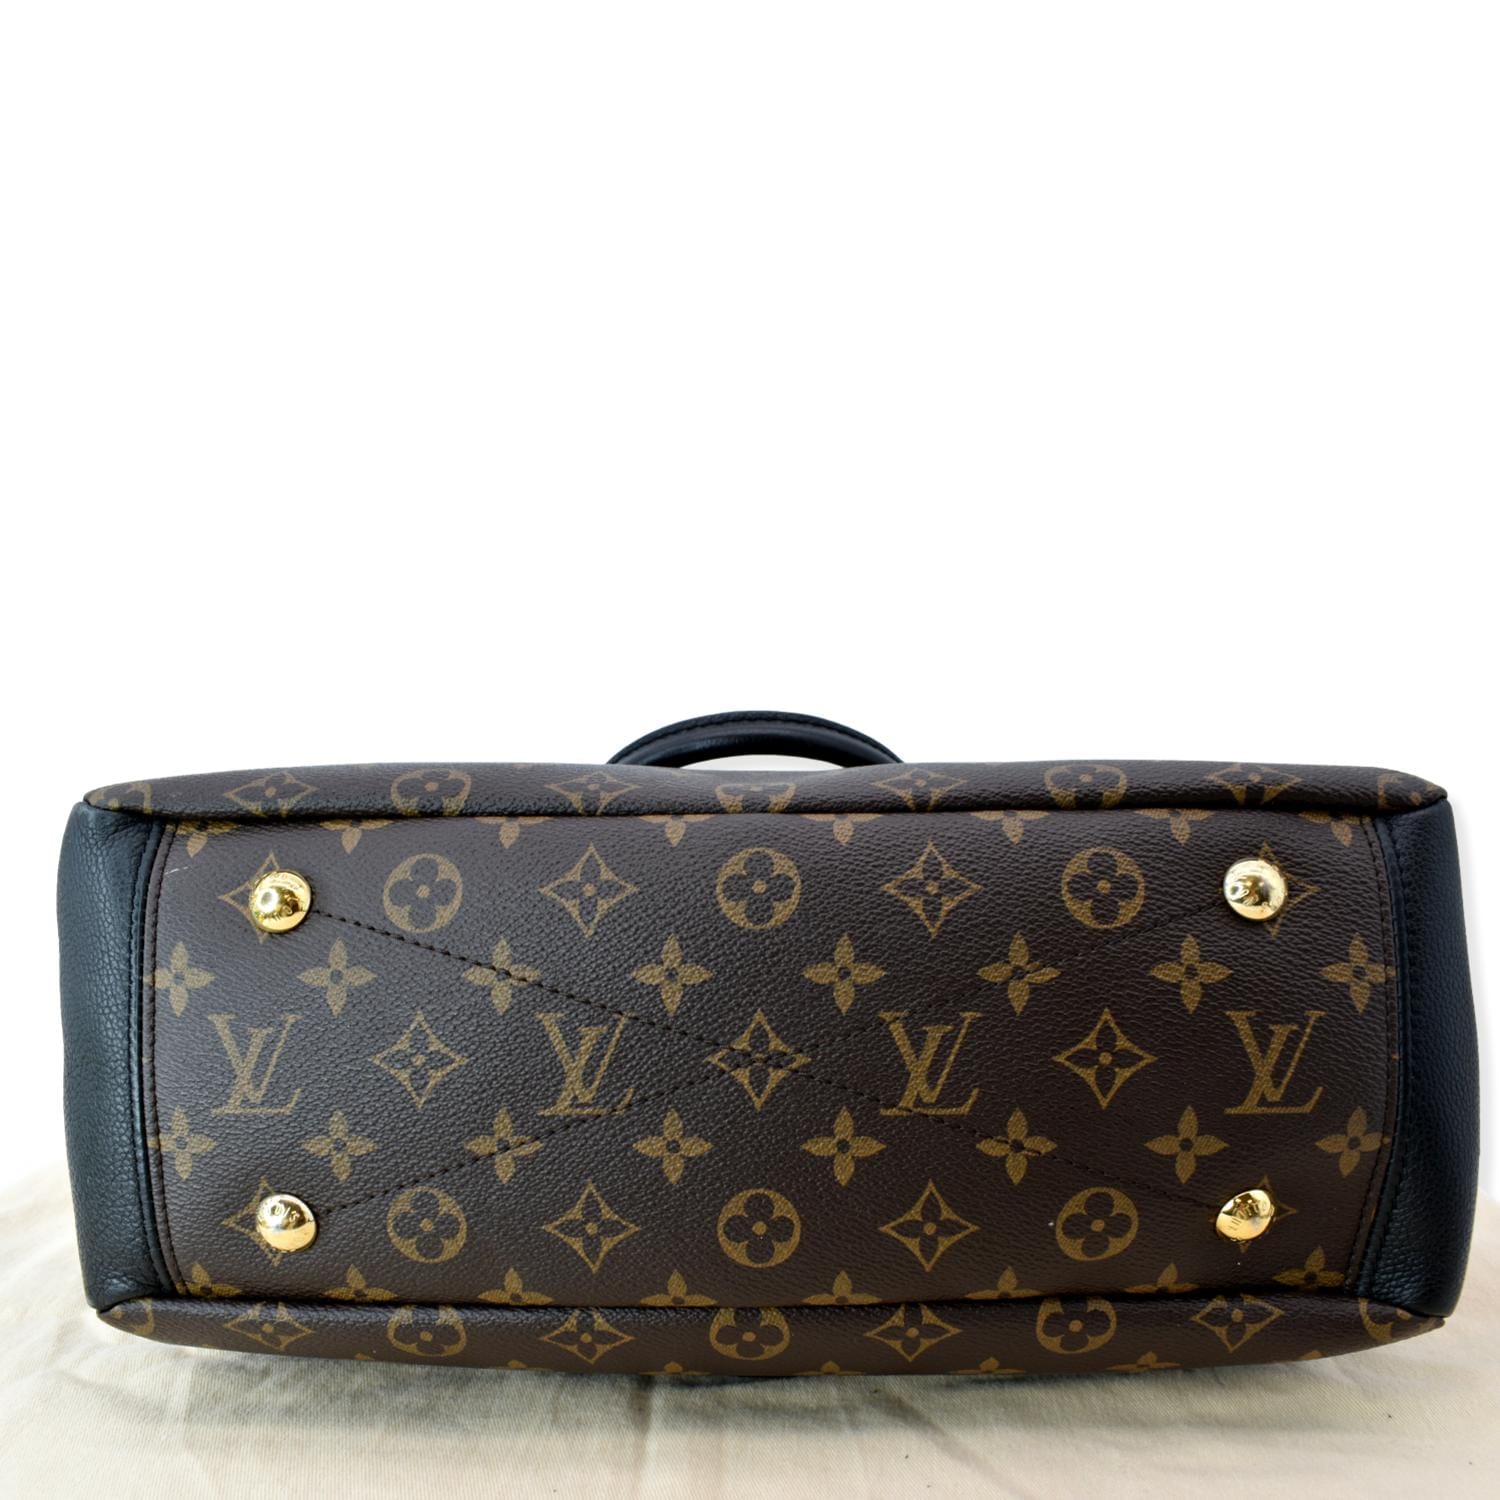 Coming in hot! 🔥 This Louis Vuitton Pallas BB Monogram is a must-have for  any LV enthusiast's collection! Snag it in excellent pre-owned…